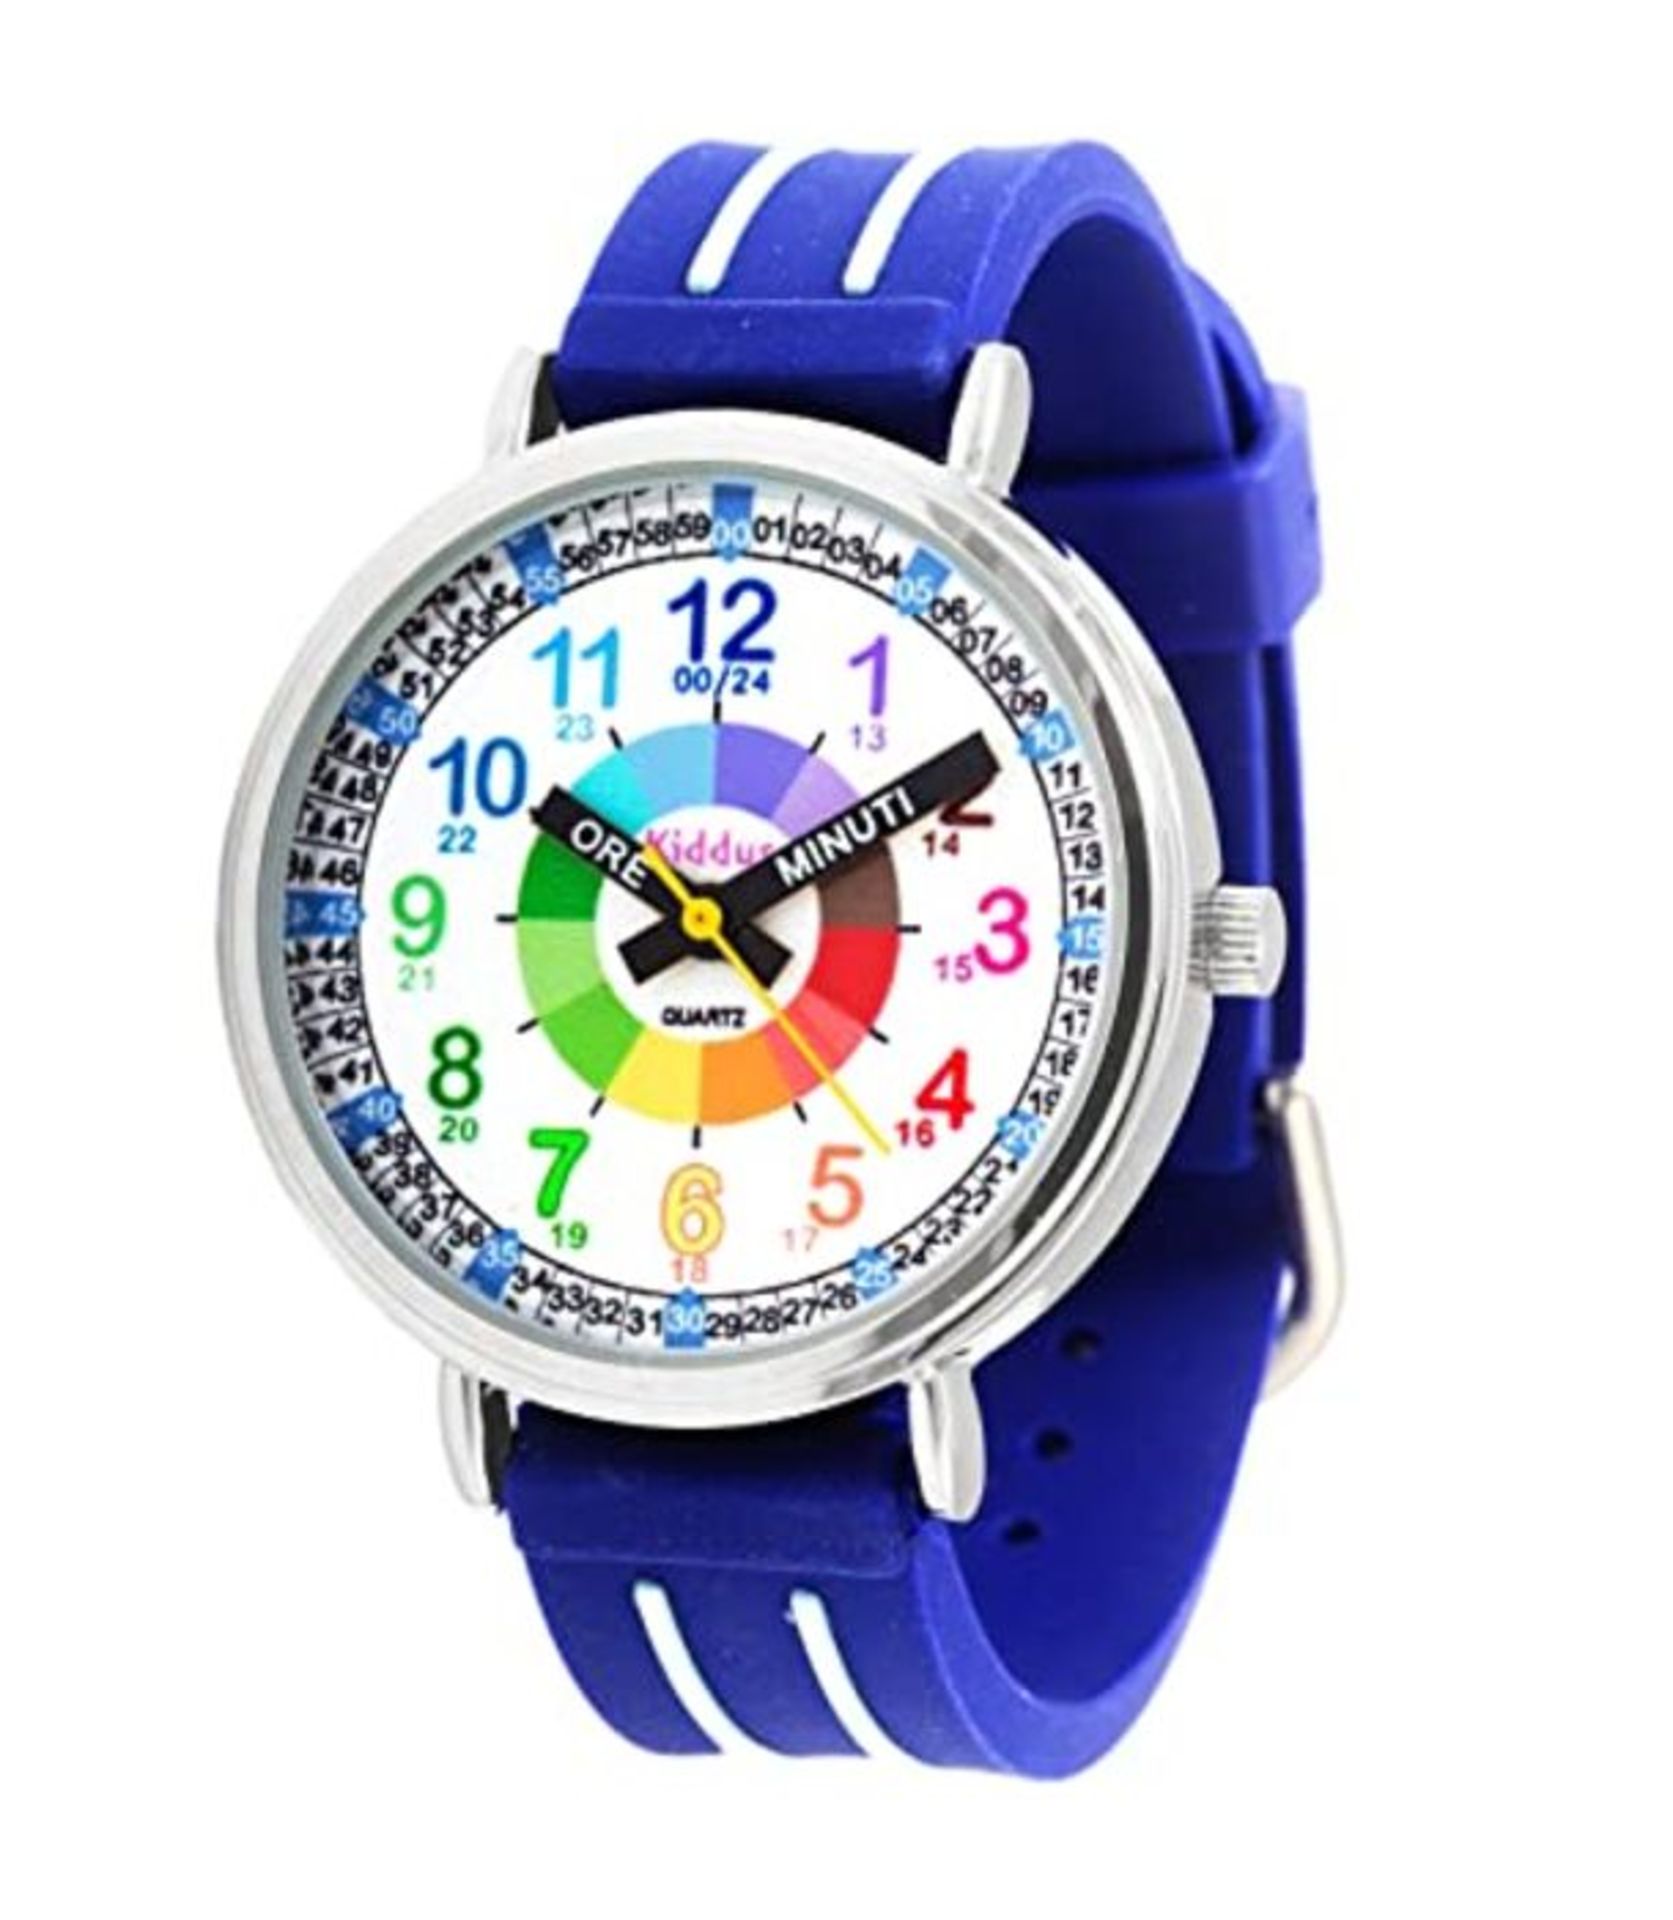 KIDDUS Educational Kids Watch for Children, Boys and Girls. Analogue. Italian Blue